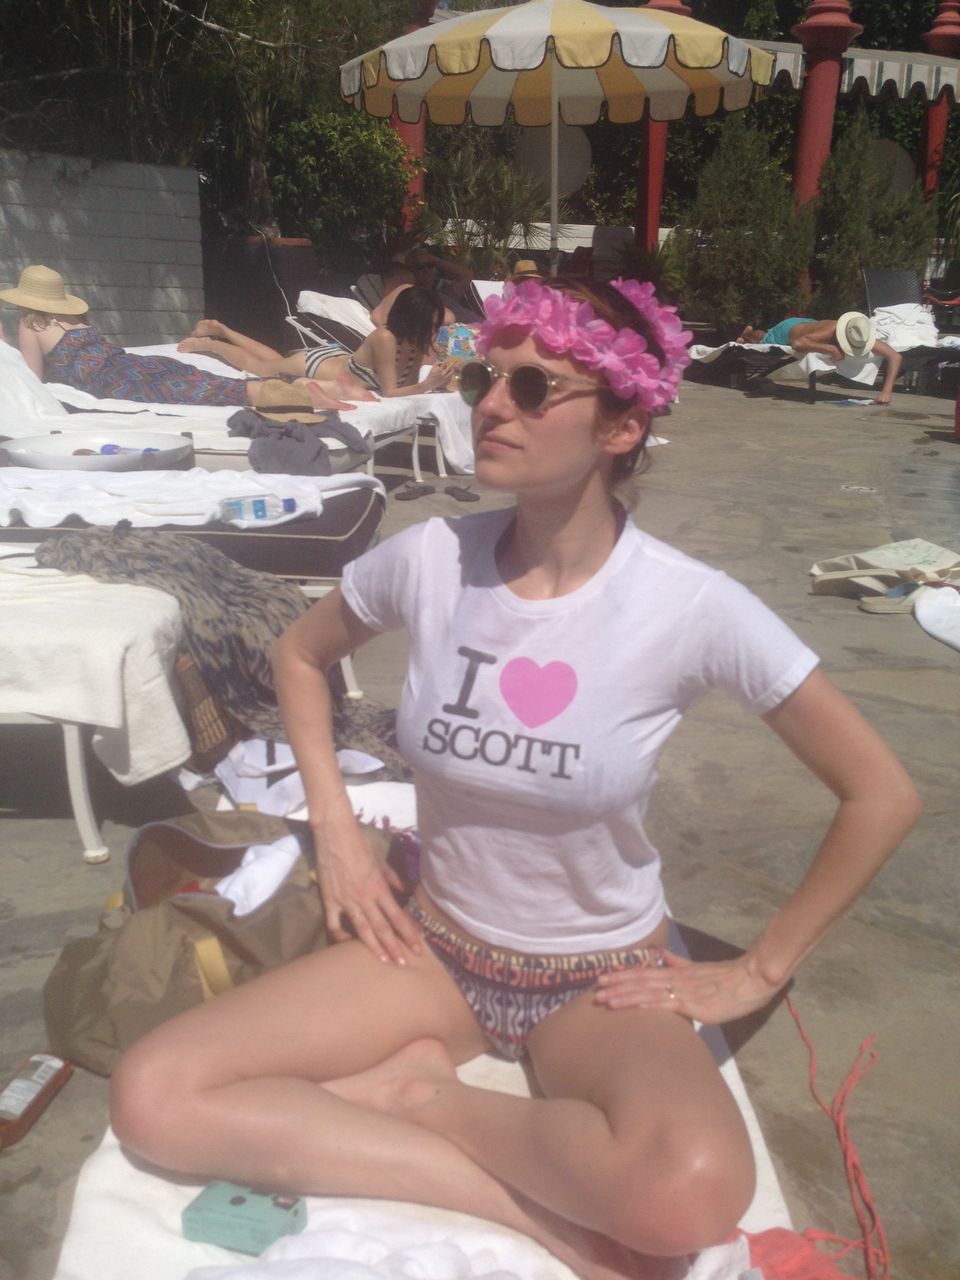 leaked pic of lake bell with i love scott shirt